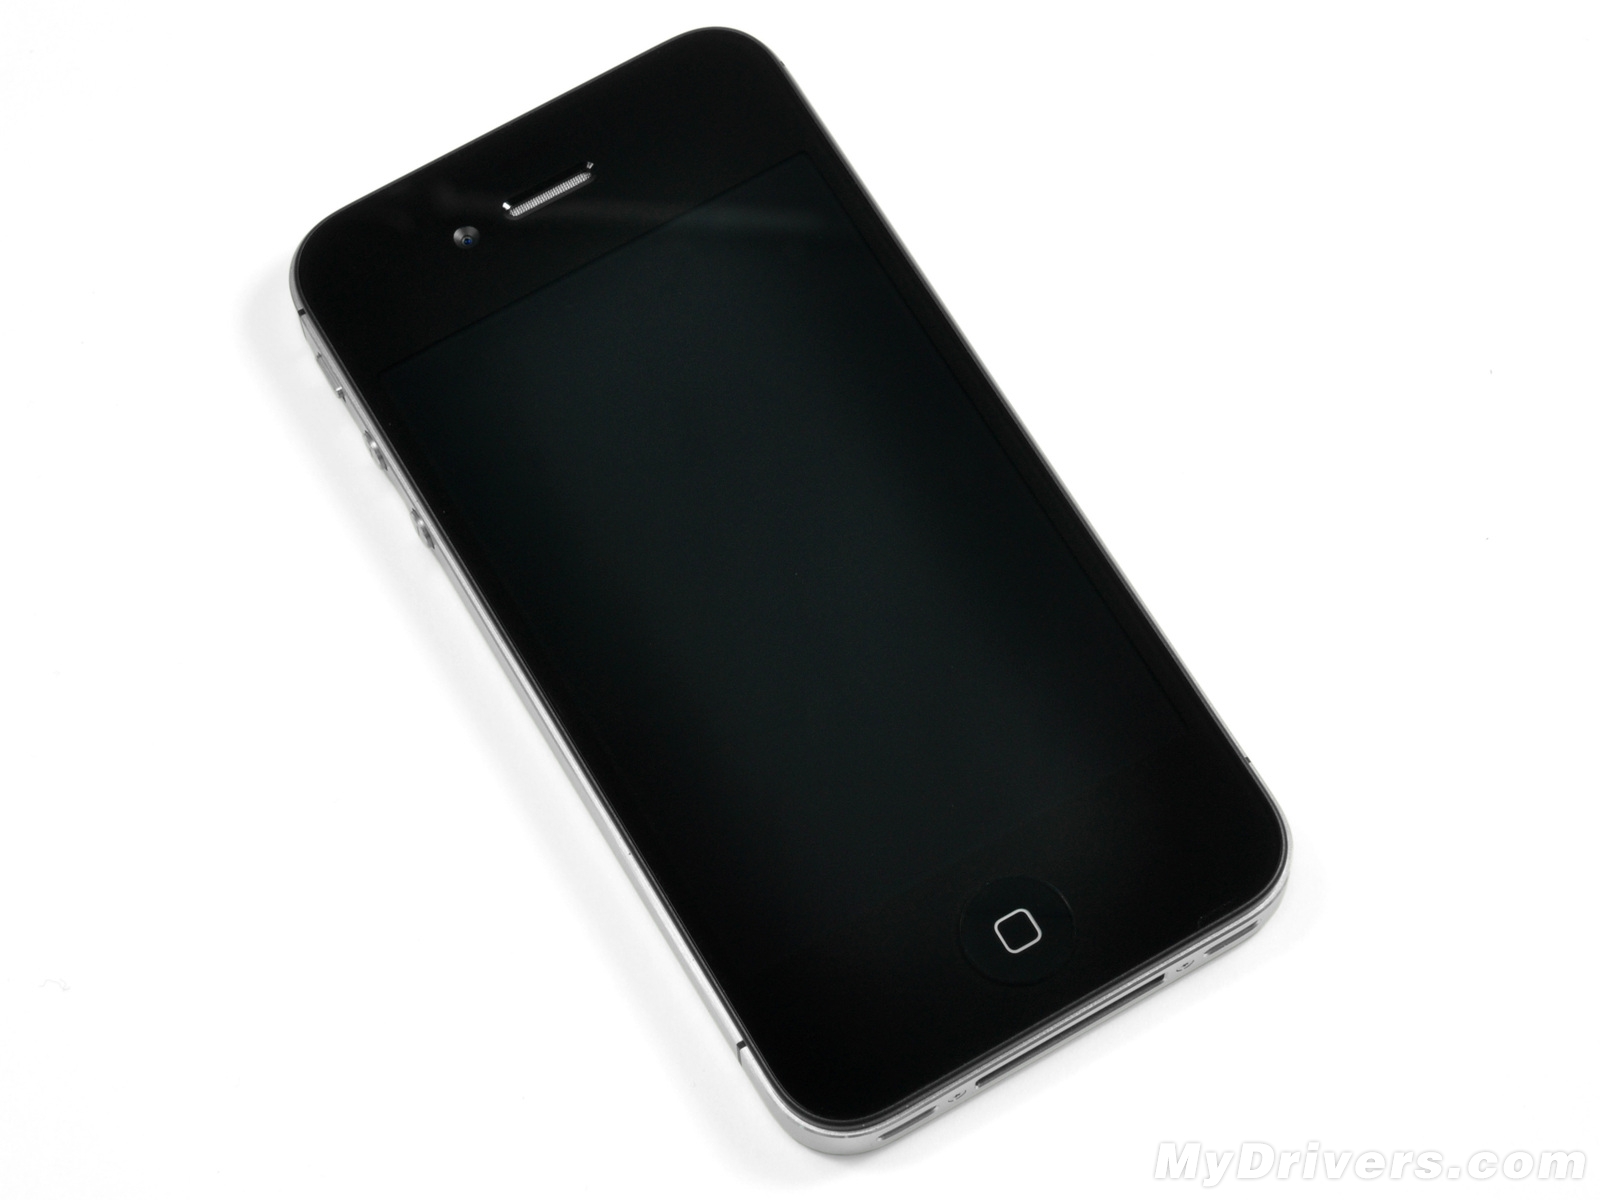 Apple to revert to iPhone 4 design as inspiration for 2020 iPhone - NotebookCheck.net News